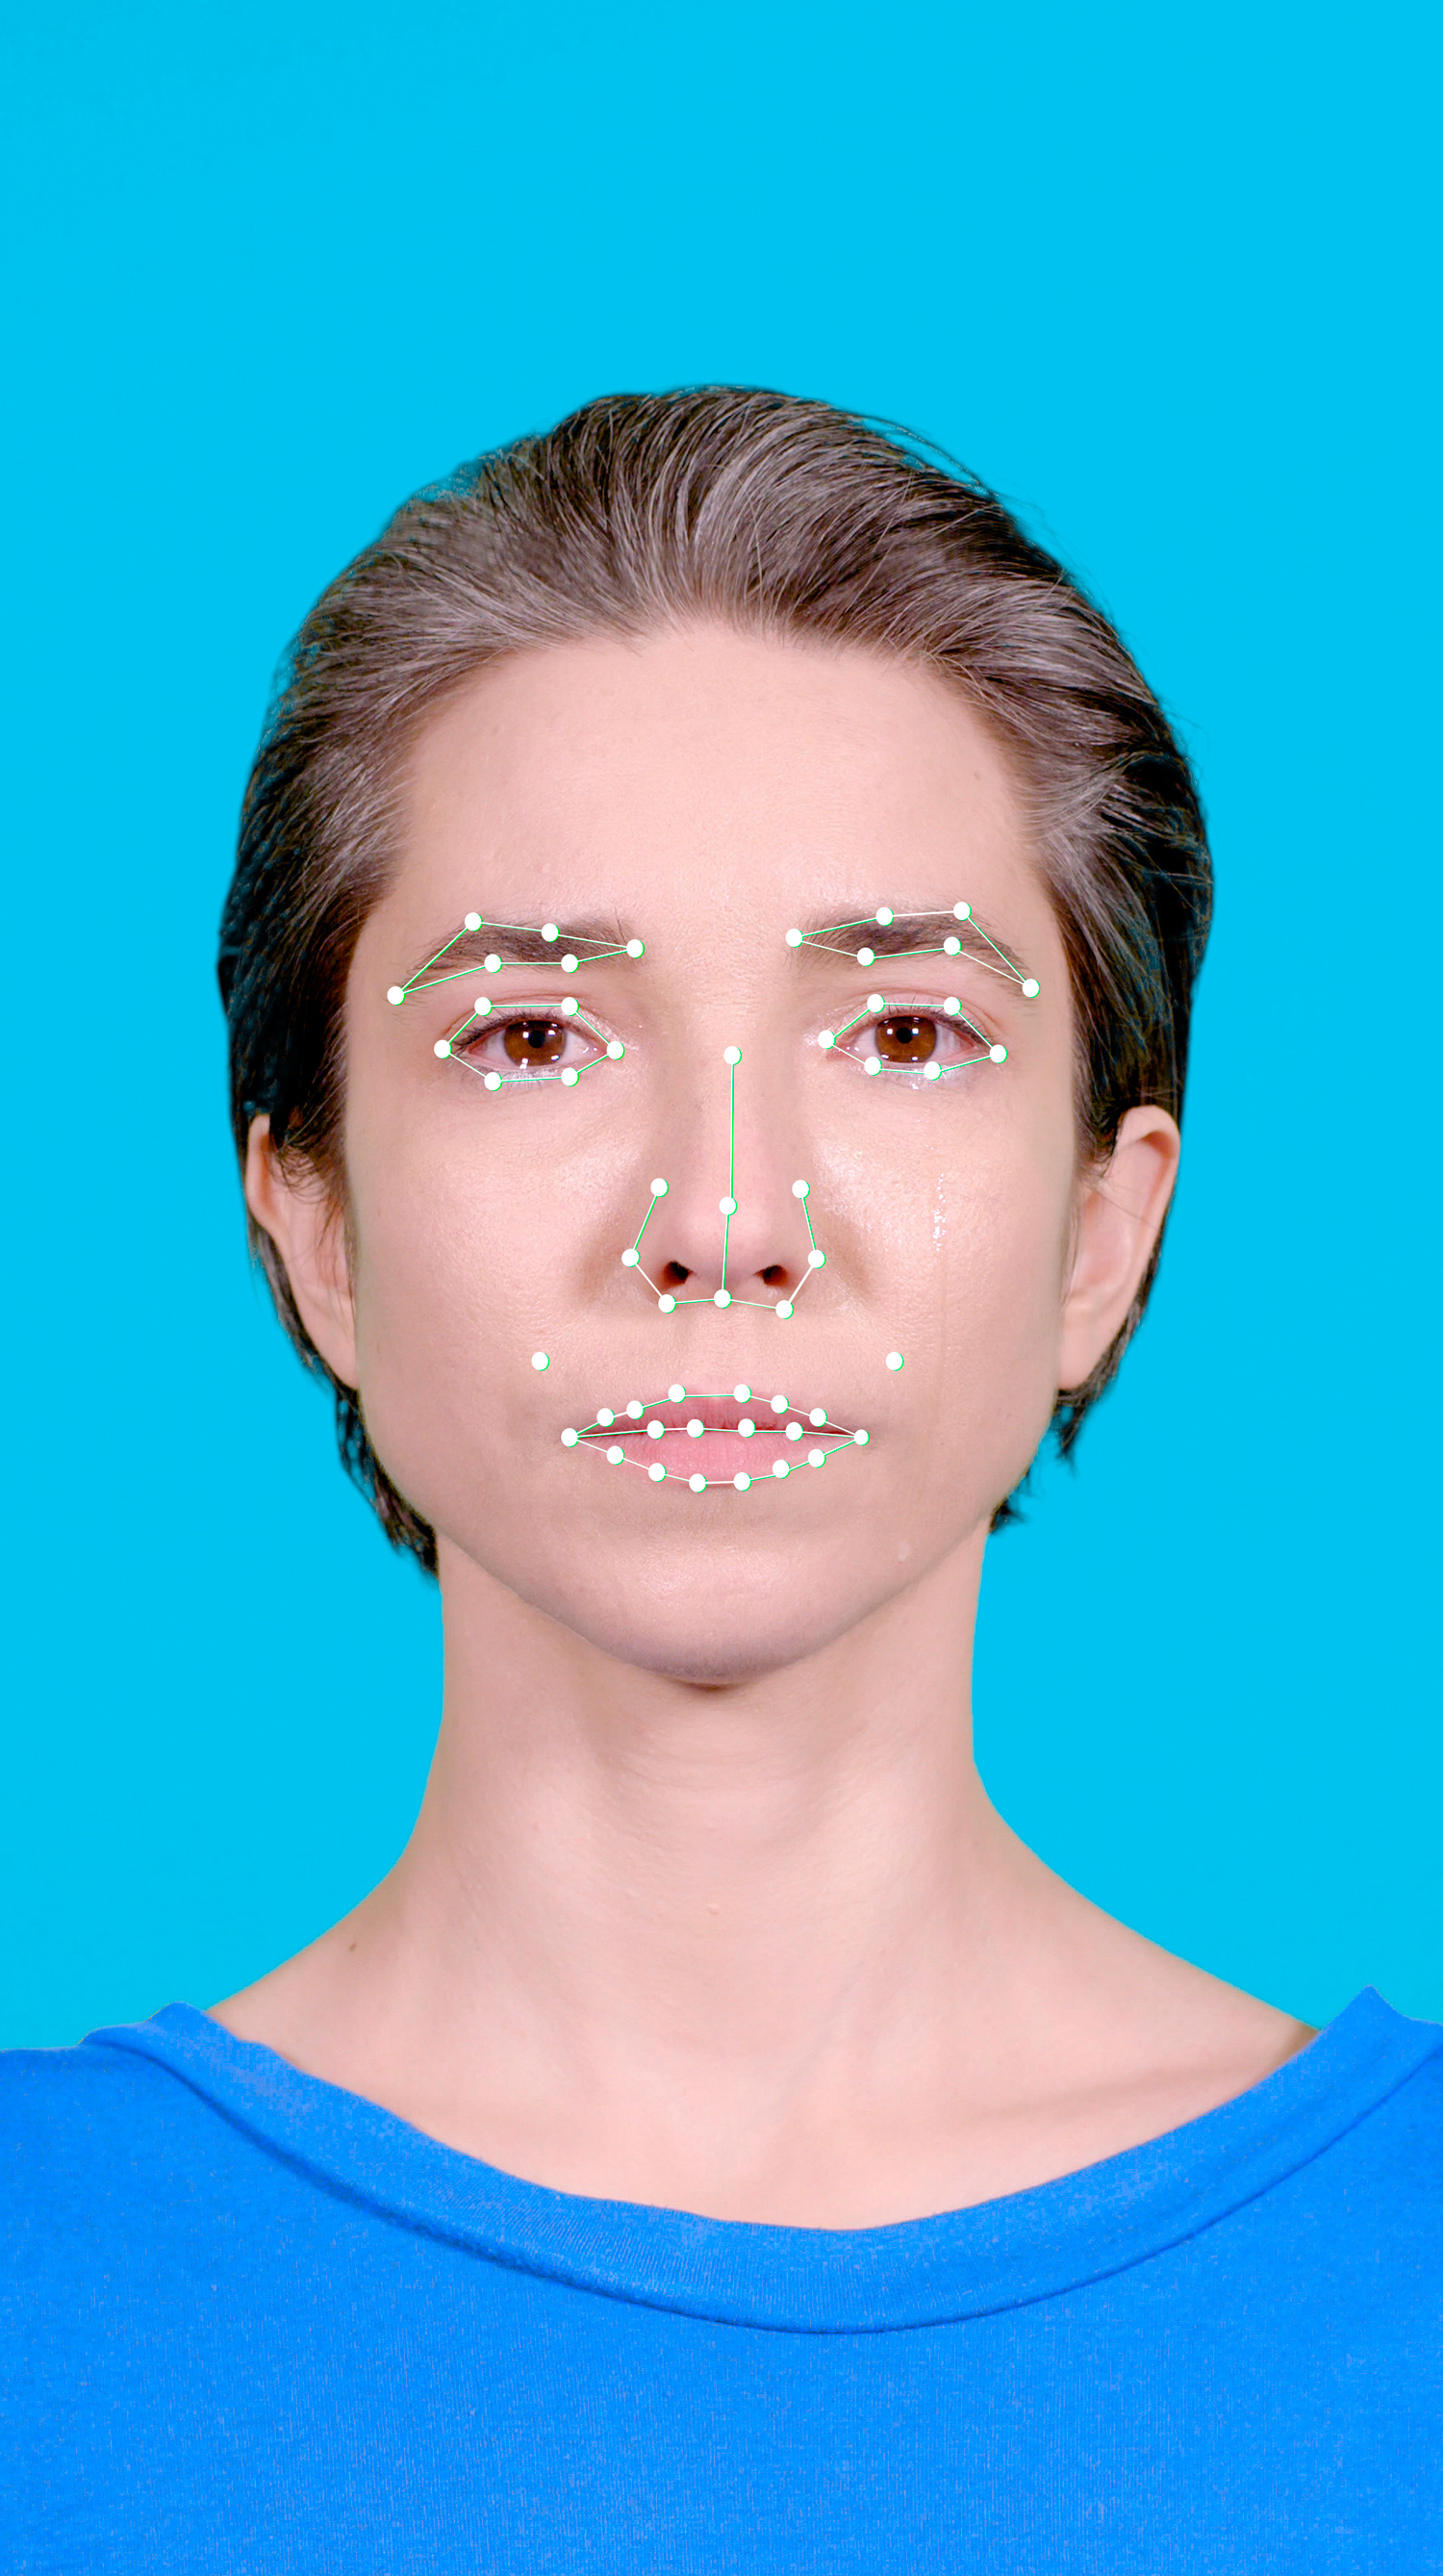 The screenshot shows a woman looking frontally into the camera. Different parts of the face are surrounded by dots and lines.